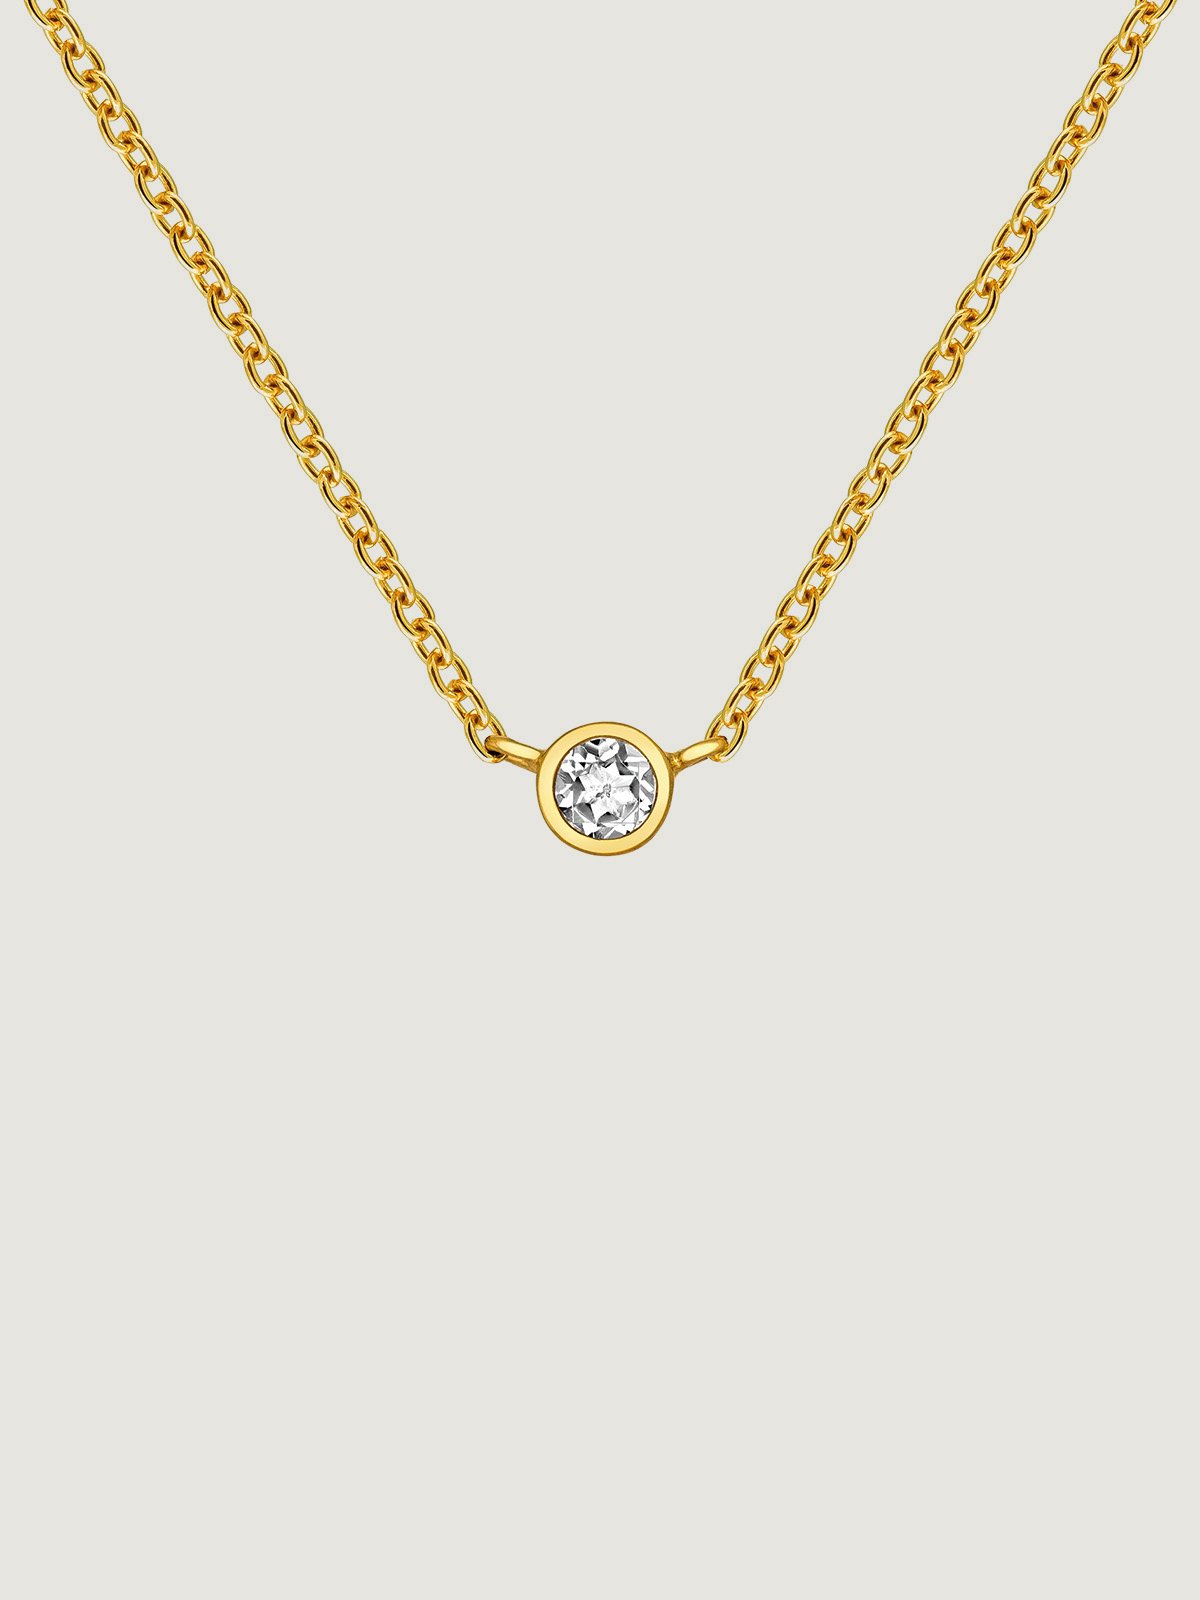 Single 925 silver pendant bathed in 18K yellow gold with white topaz